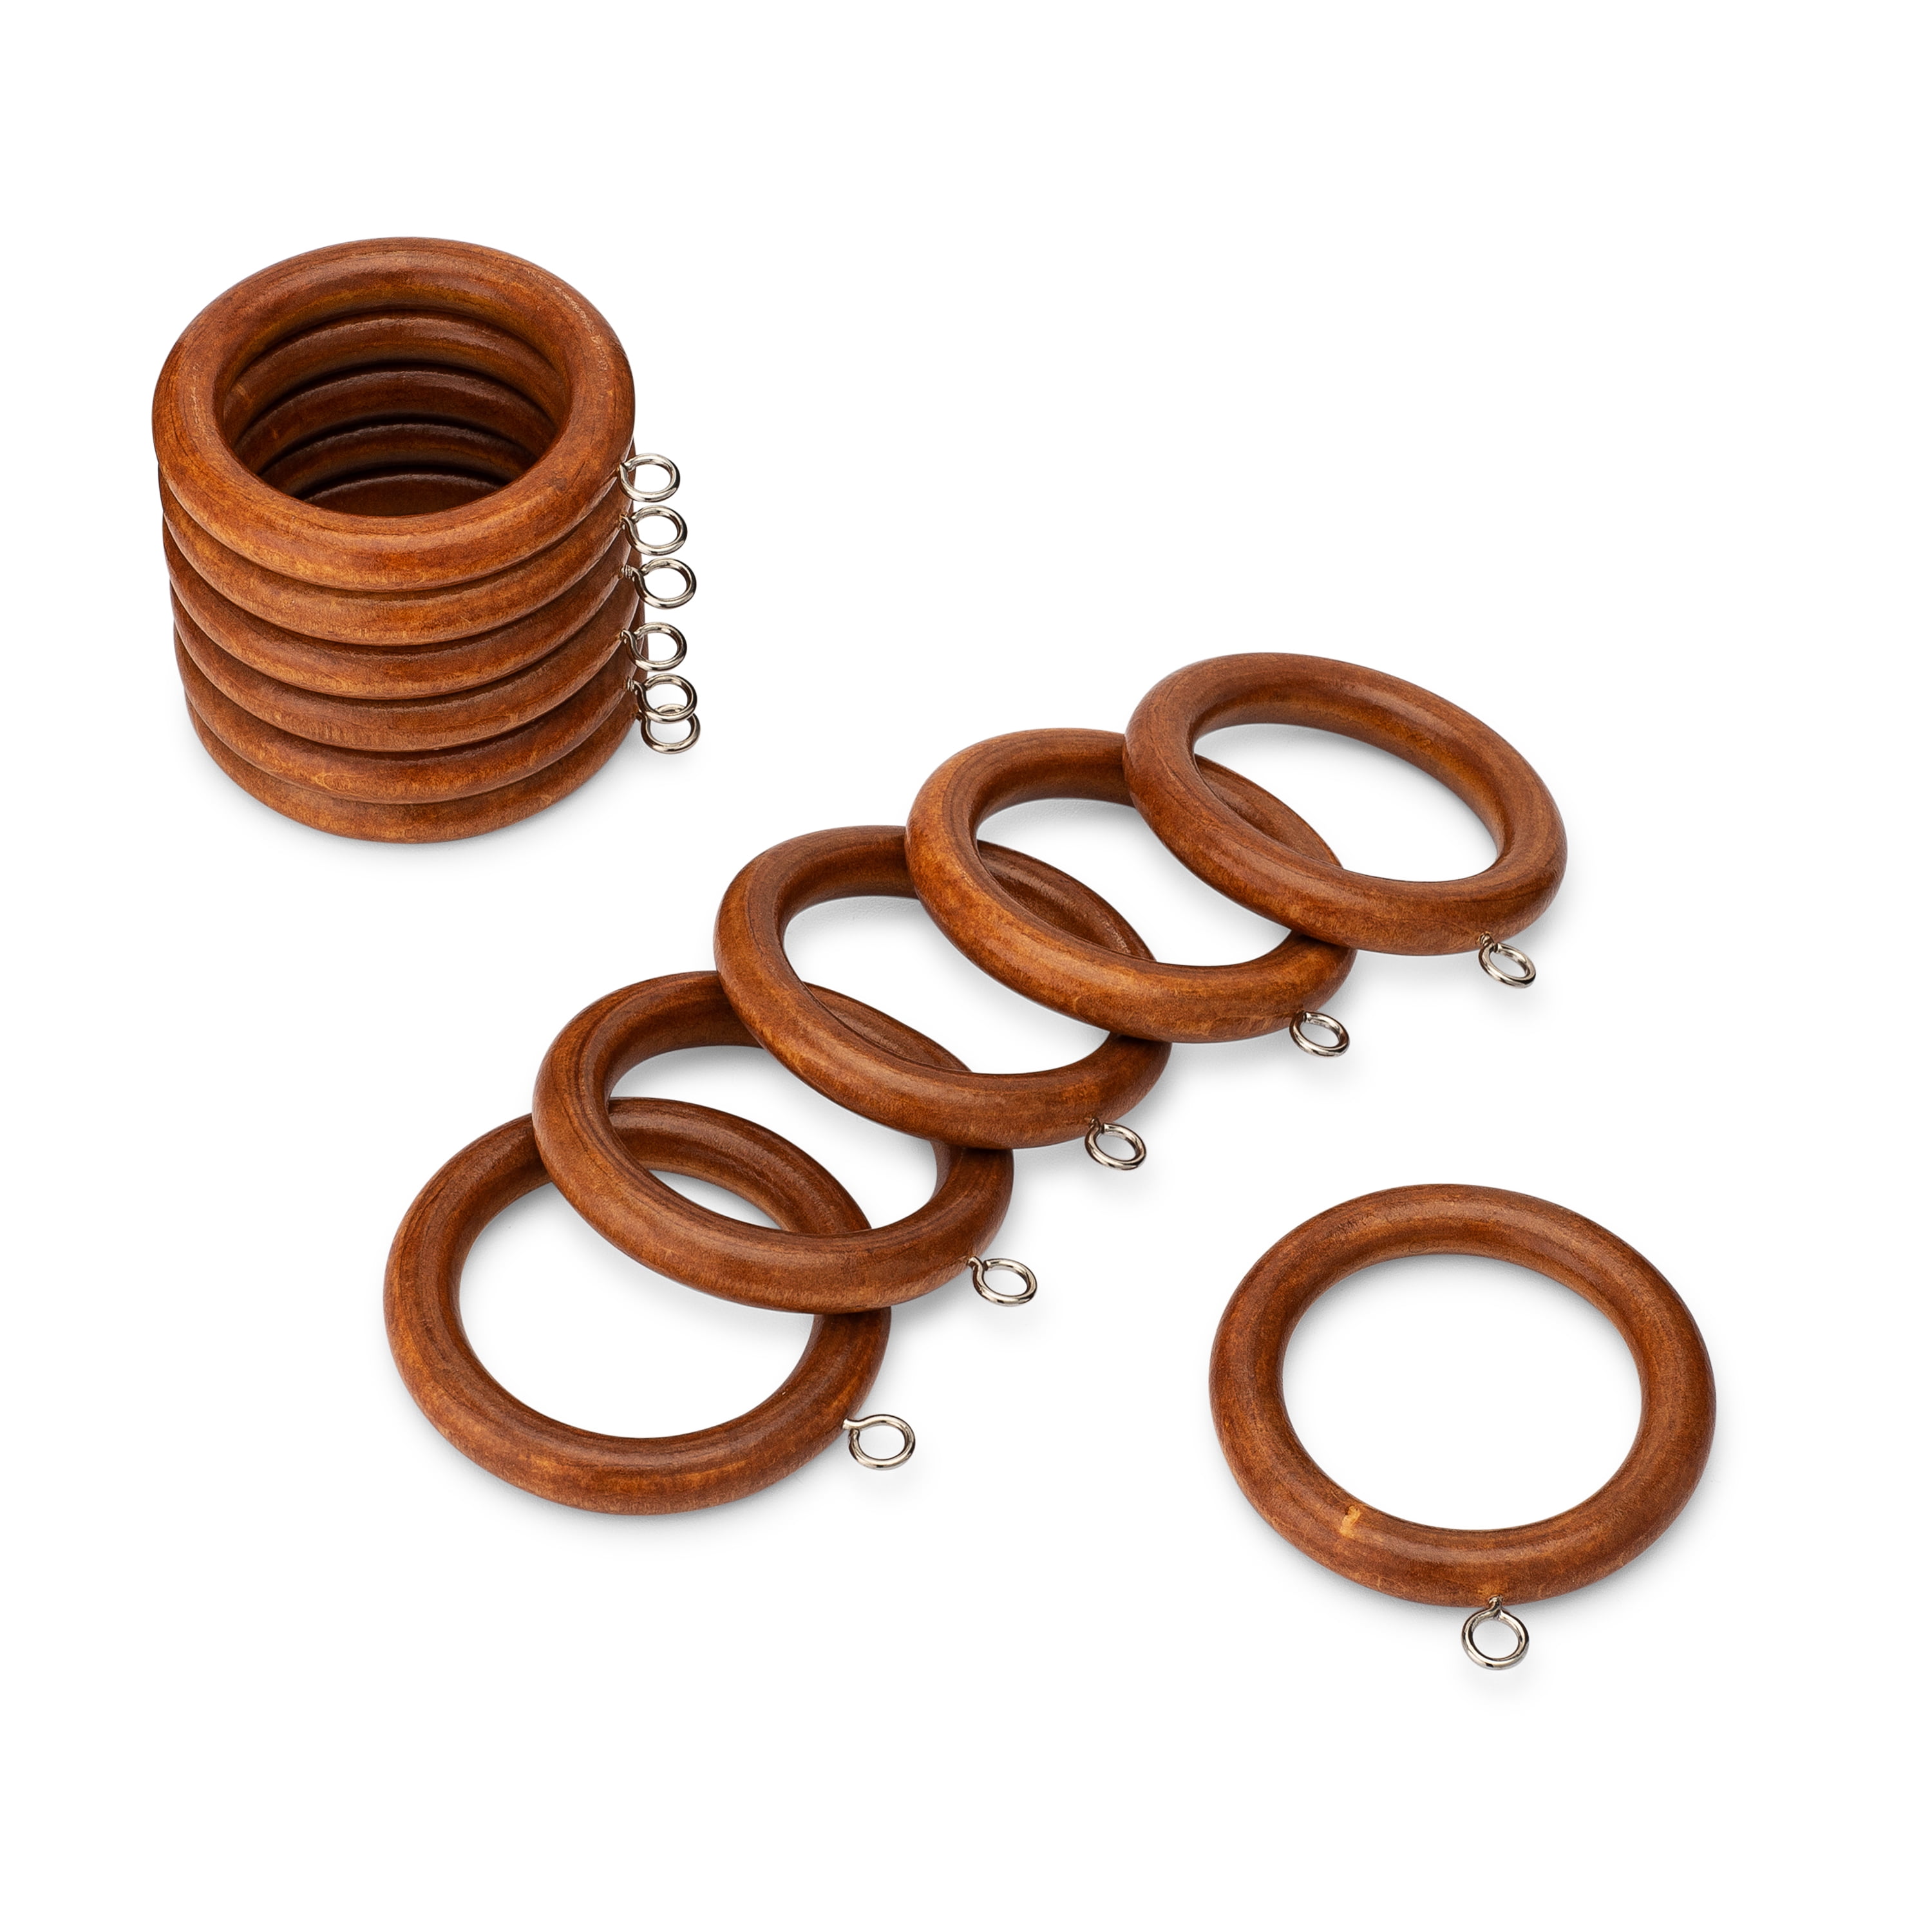 2 1/4 Inch Wood Curtain Rings in Dark Brown Finish, Set of 12 